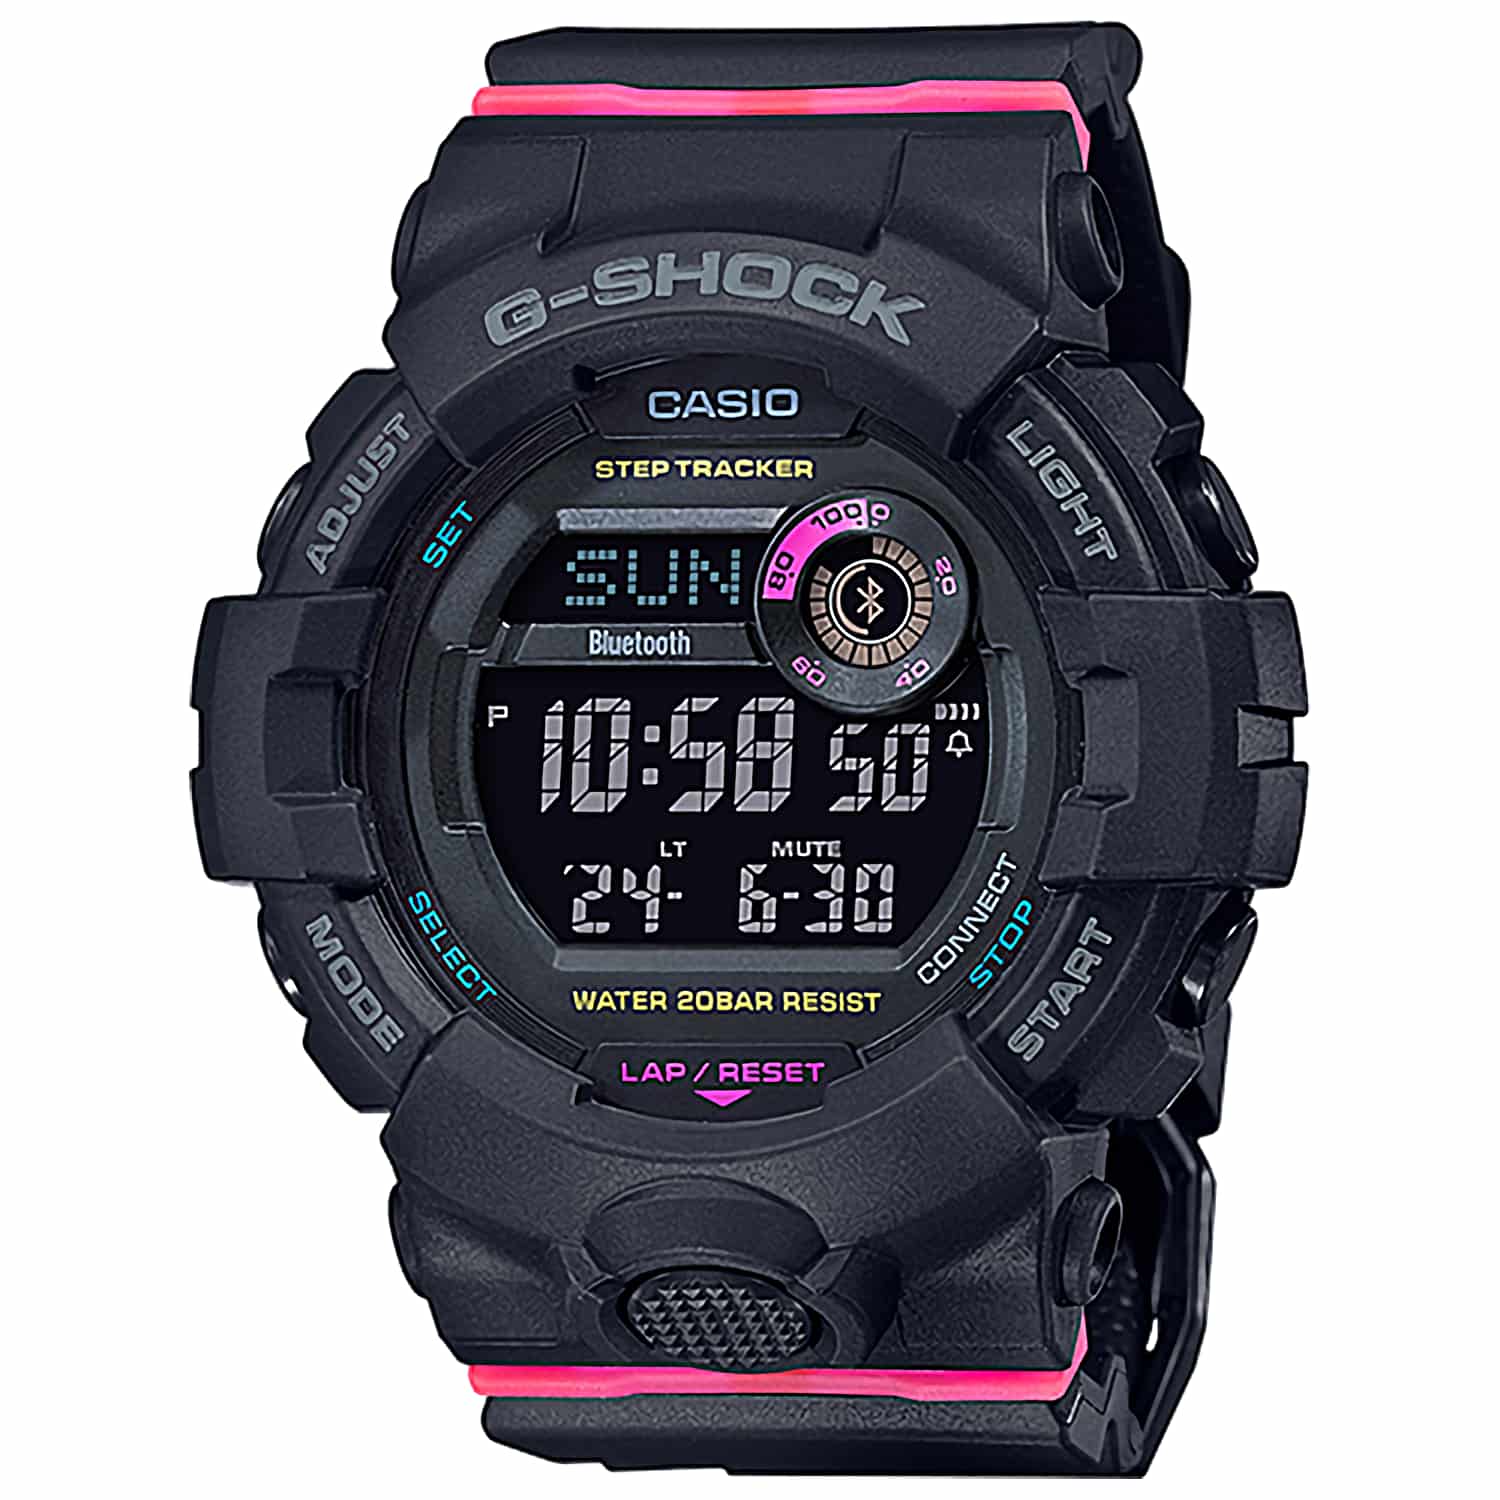 GMD-B800SC-1 Casio G-SHOCK  Womens G-SQUAD Watch. Introducing new compact G-SHOCK model that is great choice for women who prefer mannish G-SHOCK styling. These G-SQUAD models add a new selection of colours to the G-SQUAD lineup of sports watches that mak